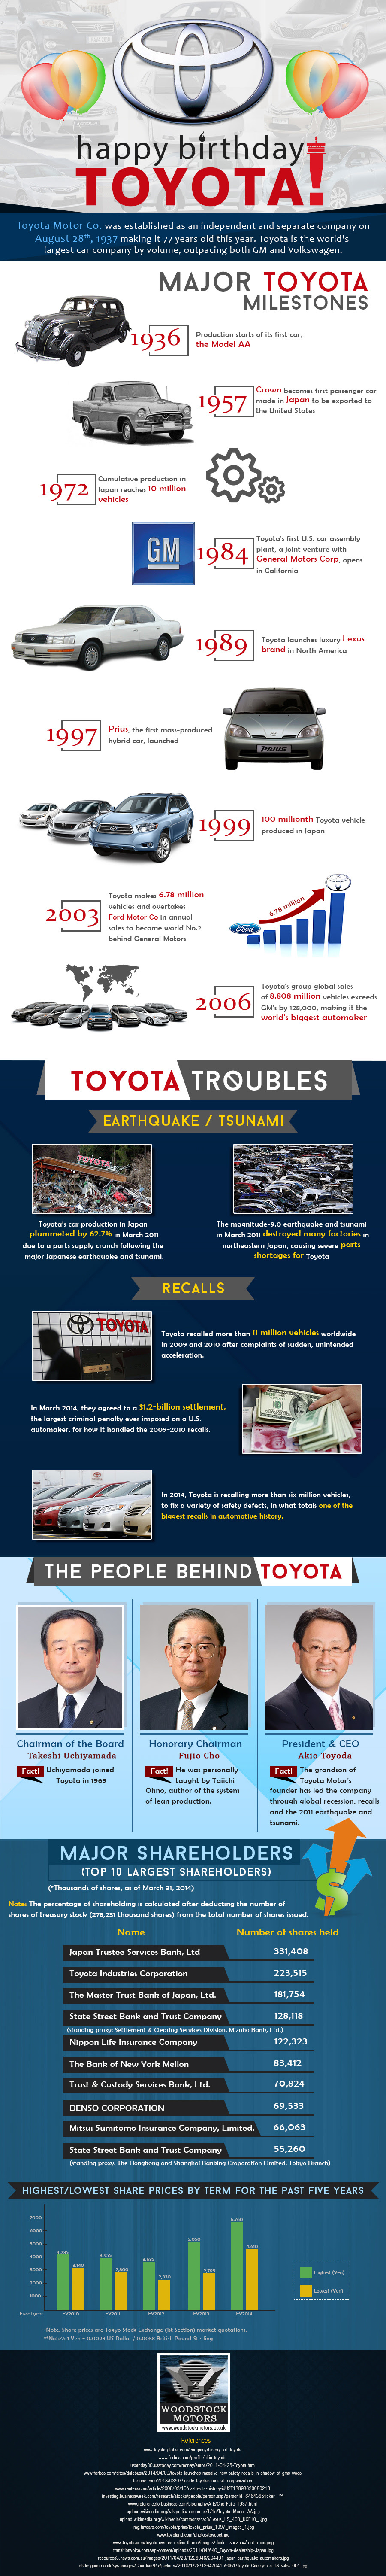  From http://www.woodstockmotors.co.uk/blog/happy-birthday-toyota-an-infographic/ 